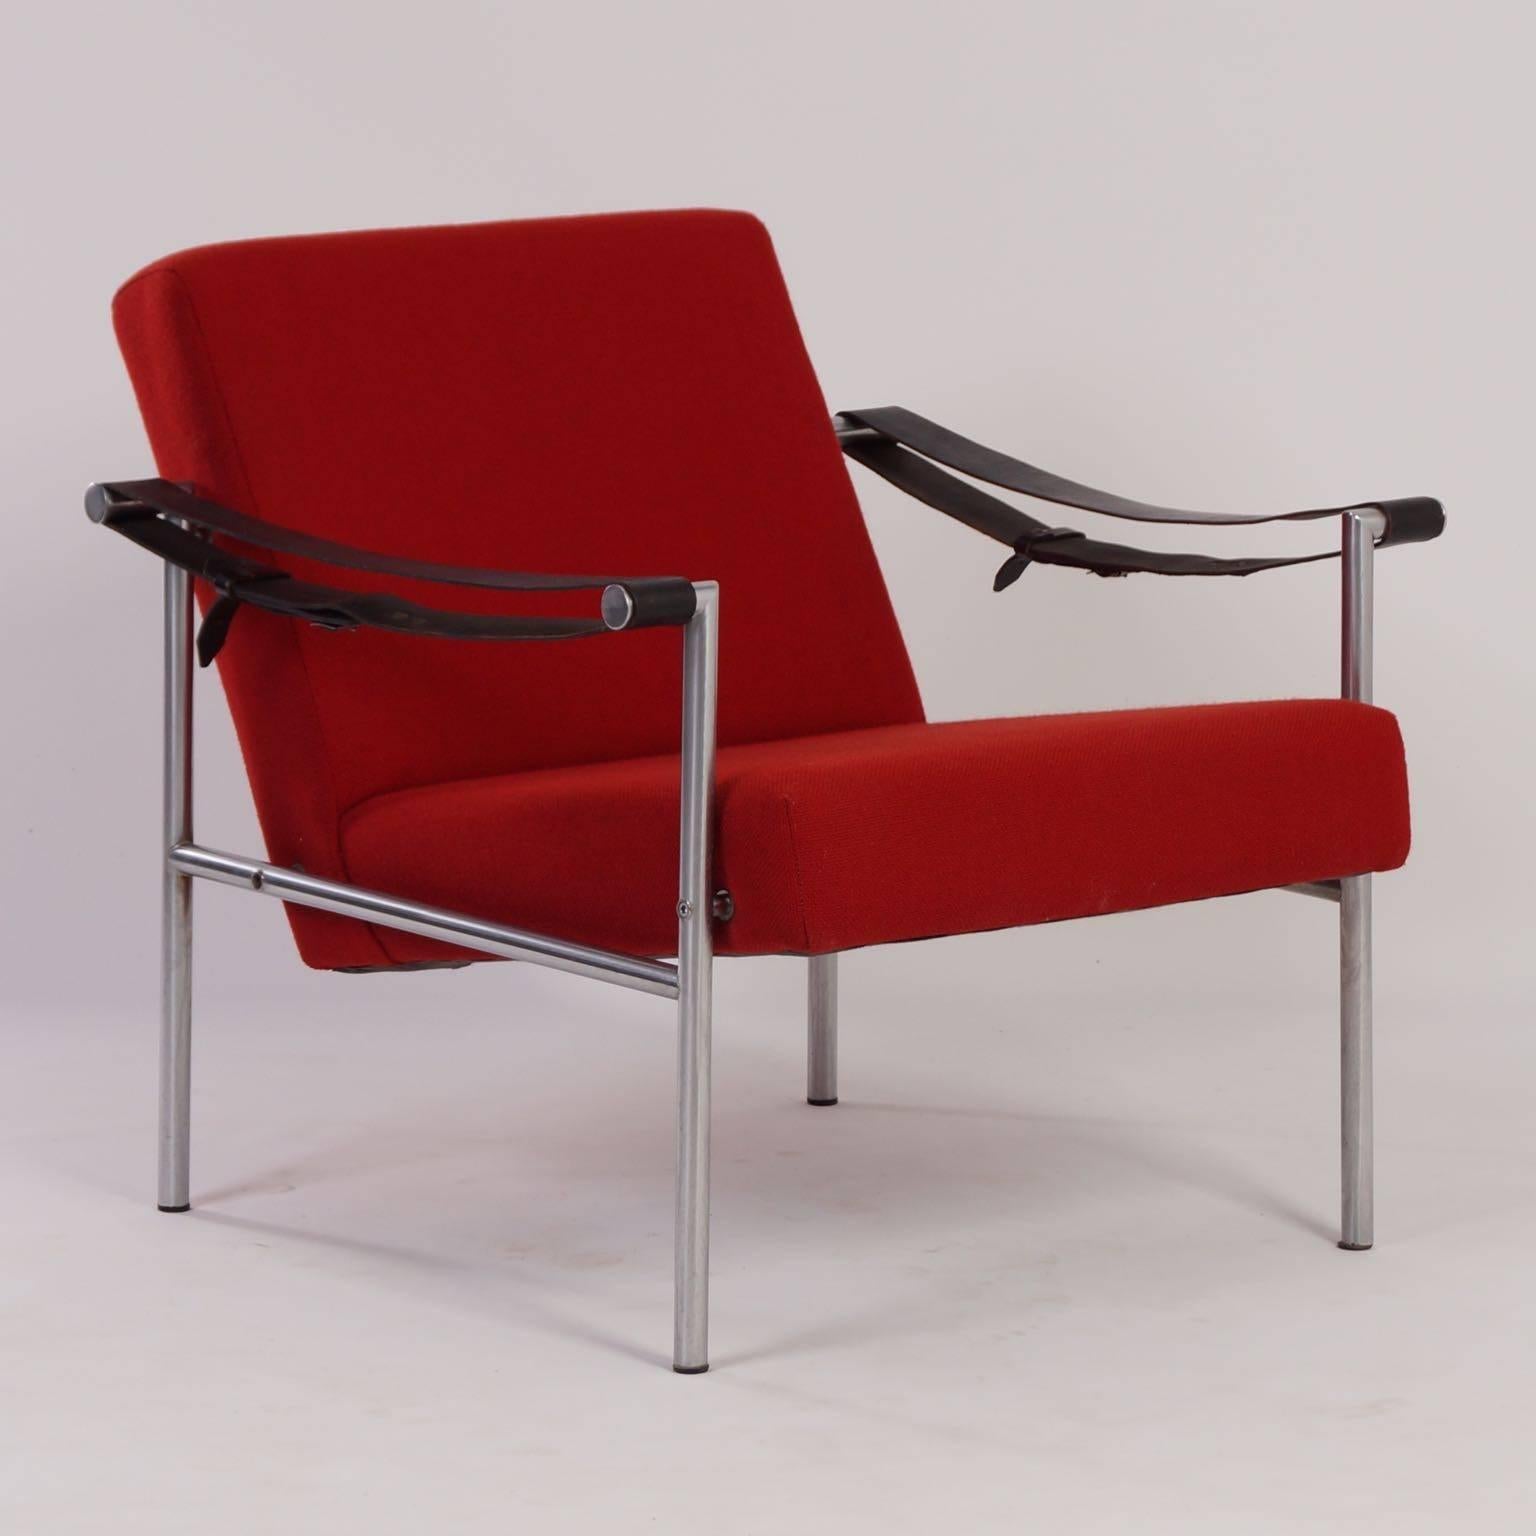 Mid-Century Modern SZ 38 SZ 08 Armchairs by Martin Visser and Dick v.d. Net for ‘t Spectrum, 1960s